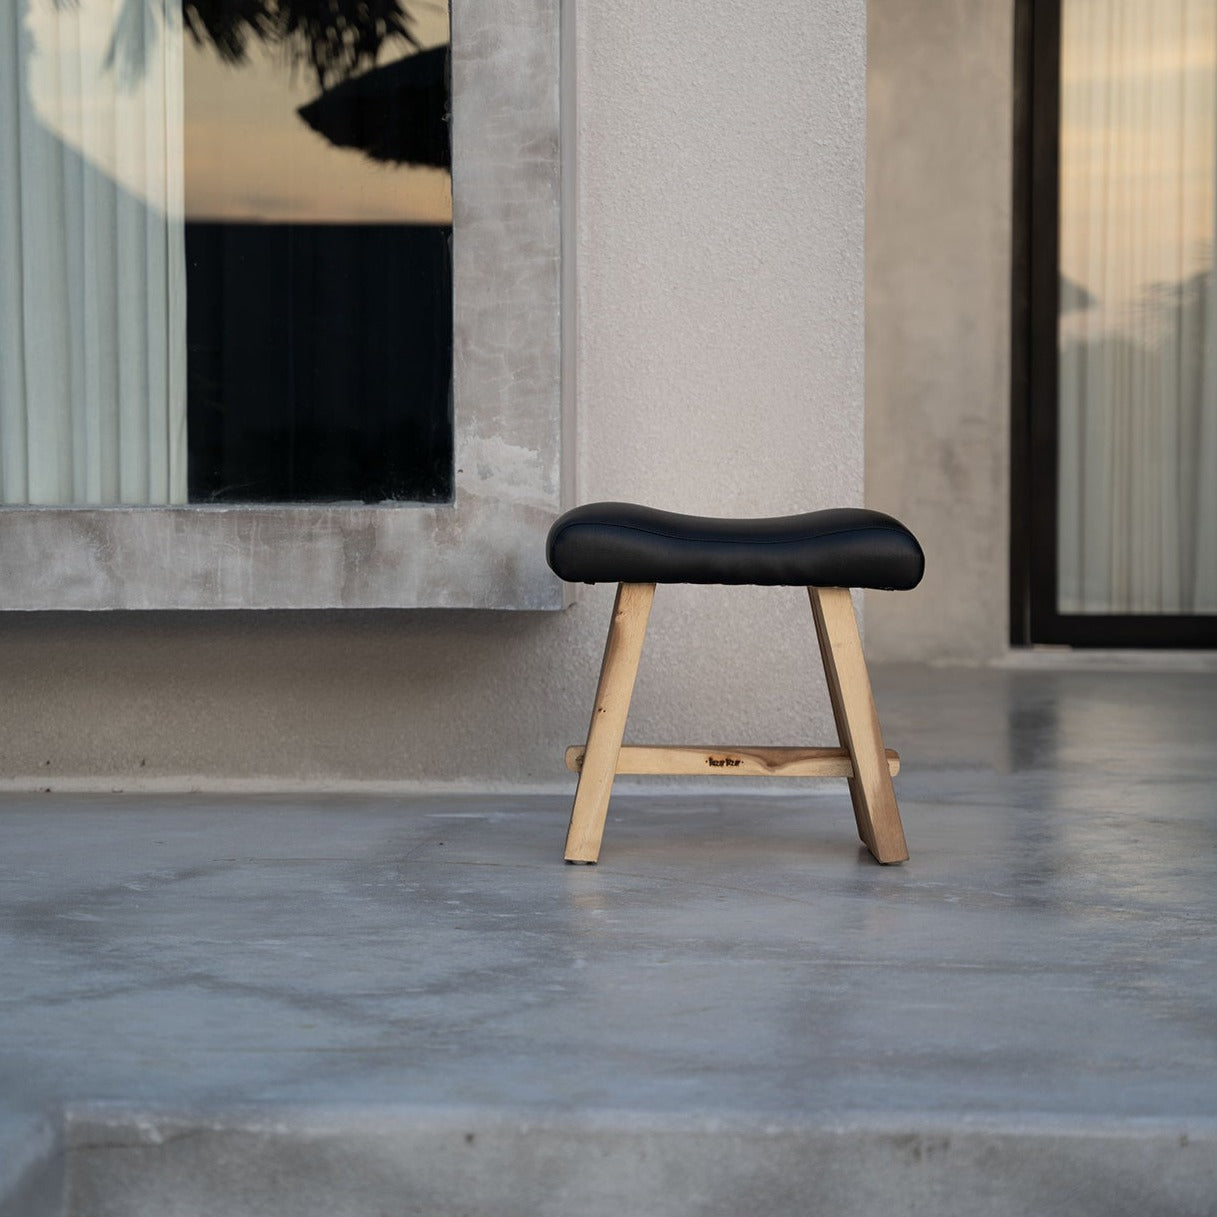 THE SUAR Stool with Leather - Natural Black